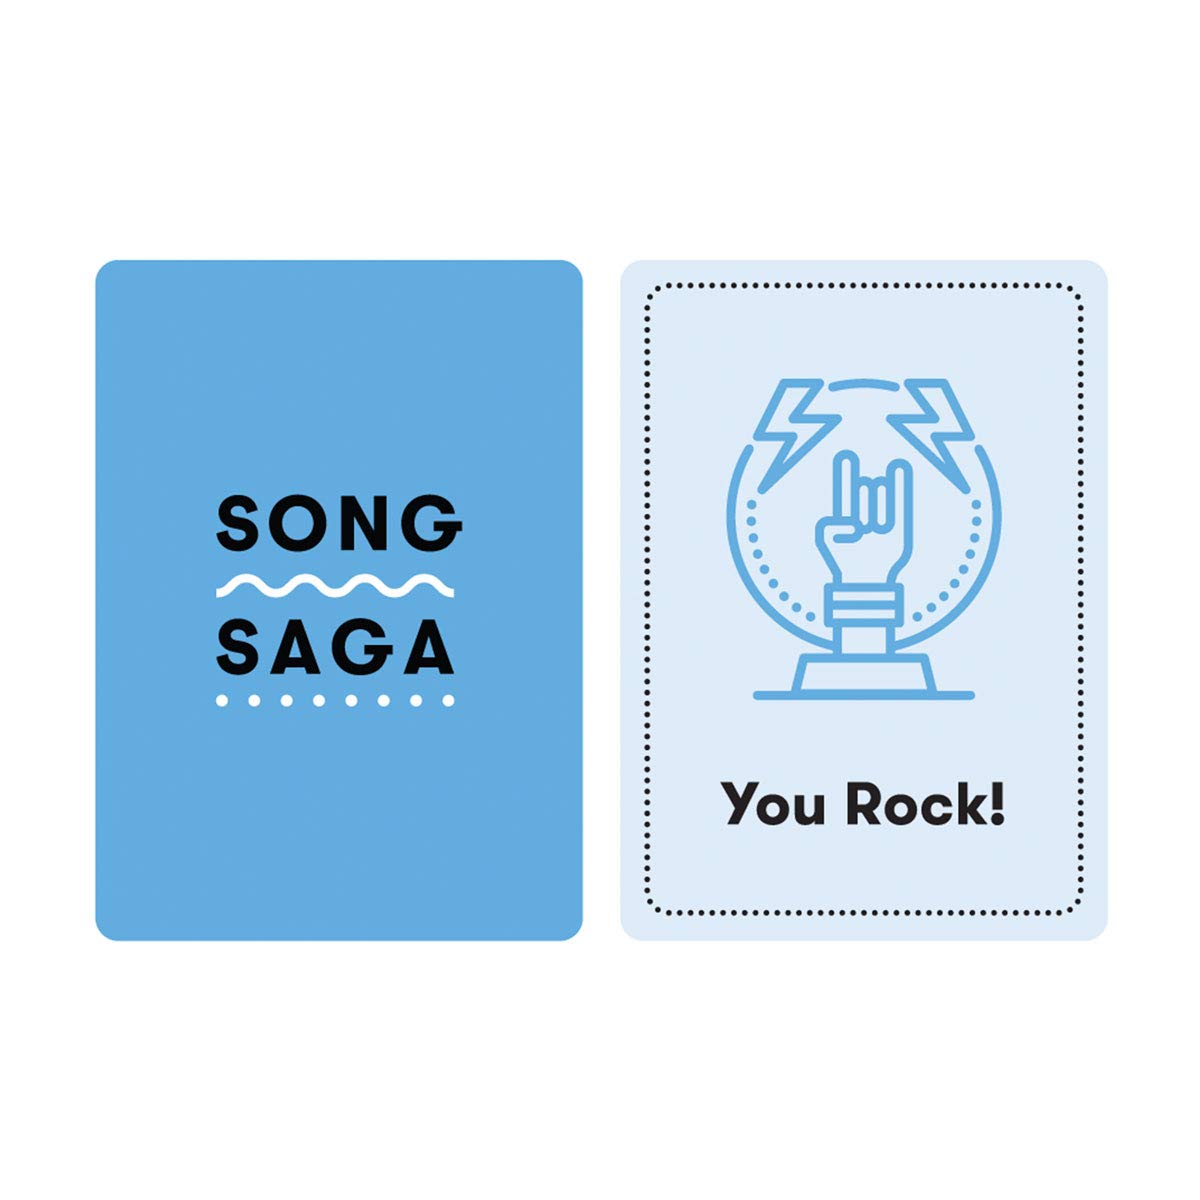 Song Saga is The Music and Memory Game That Rocks!  Share The Stories and Soundtrack of Your Life and Discover New Things About Everyone You Play with. No Singing Required.